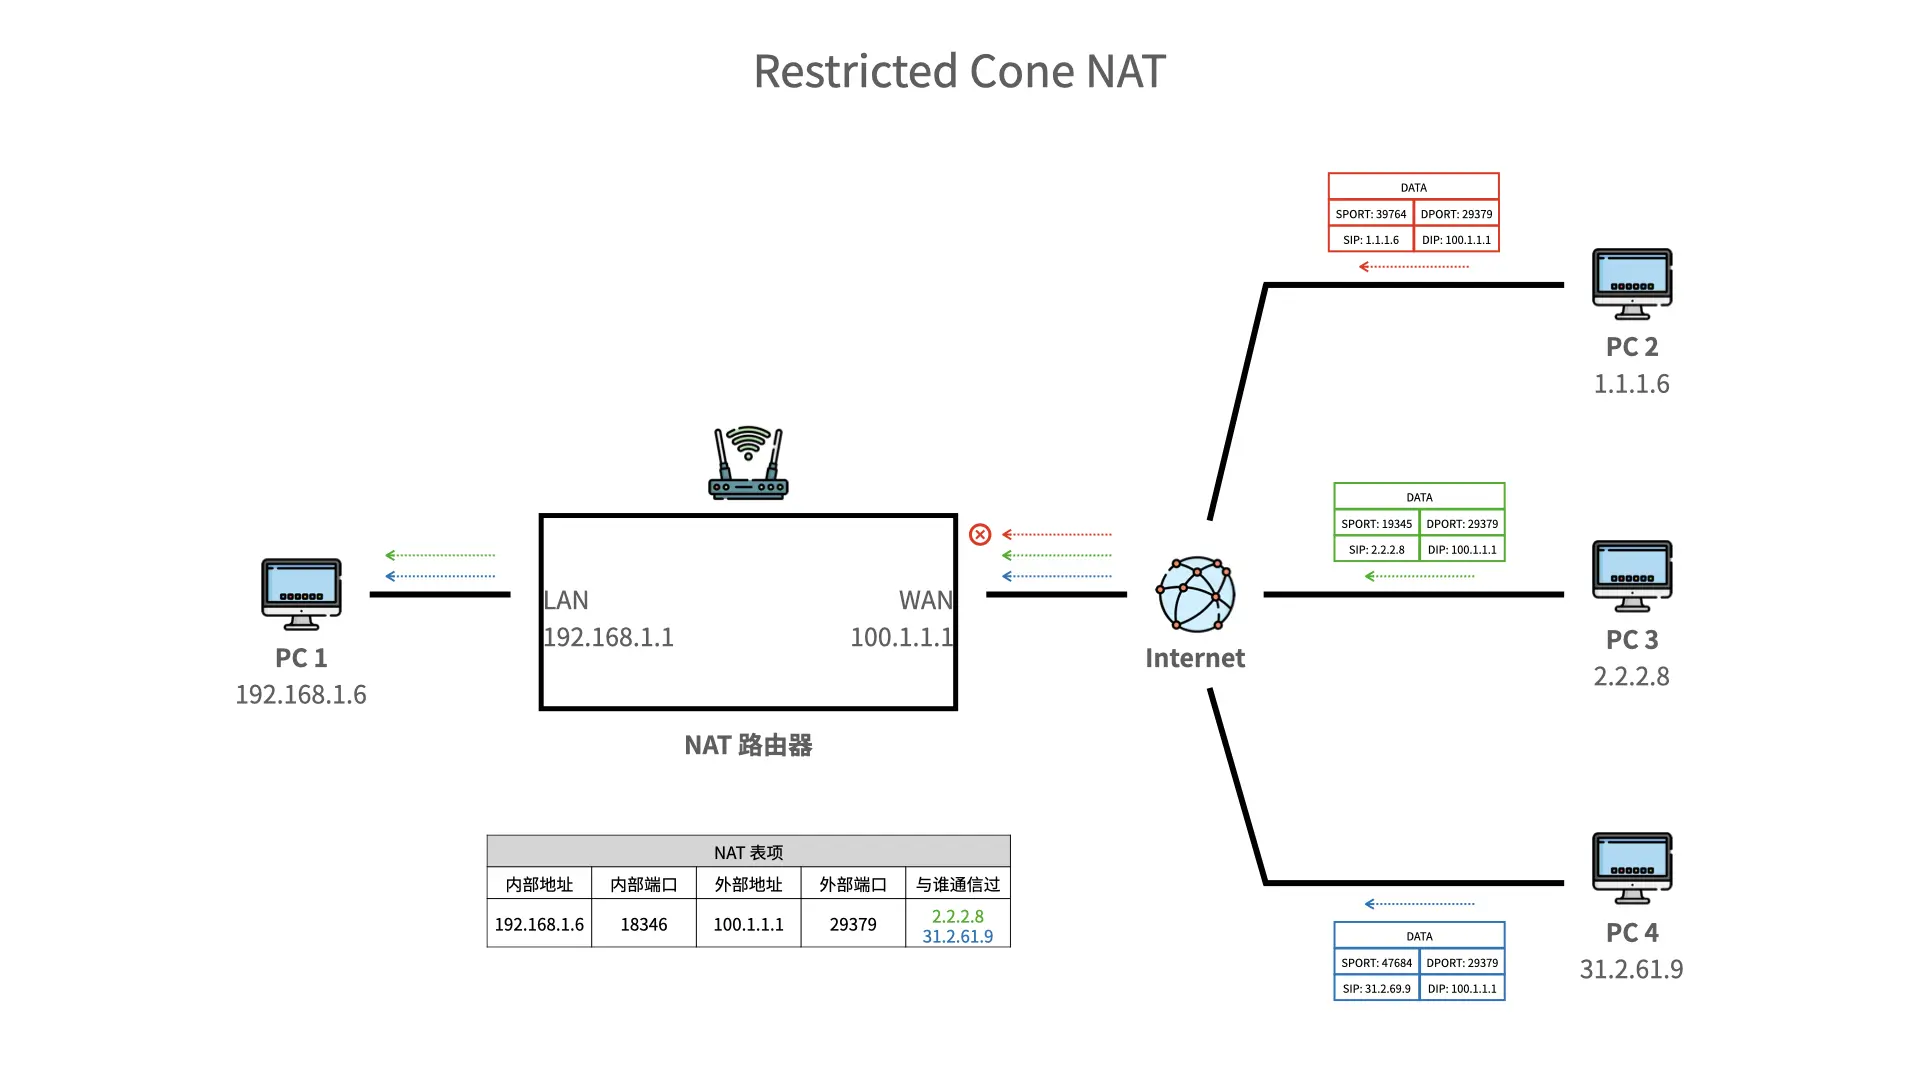 Restricted Cone NAT